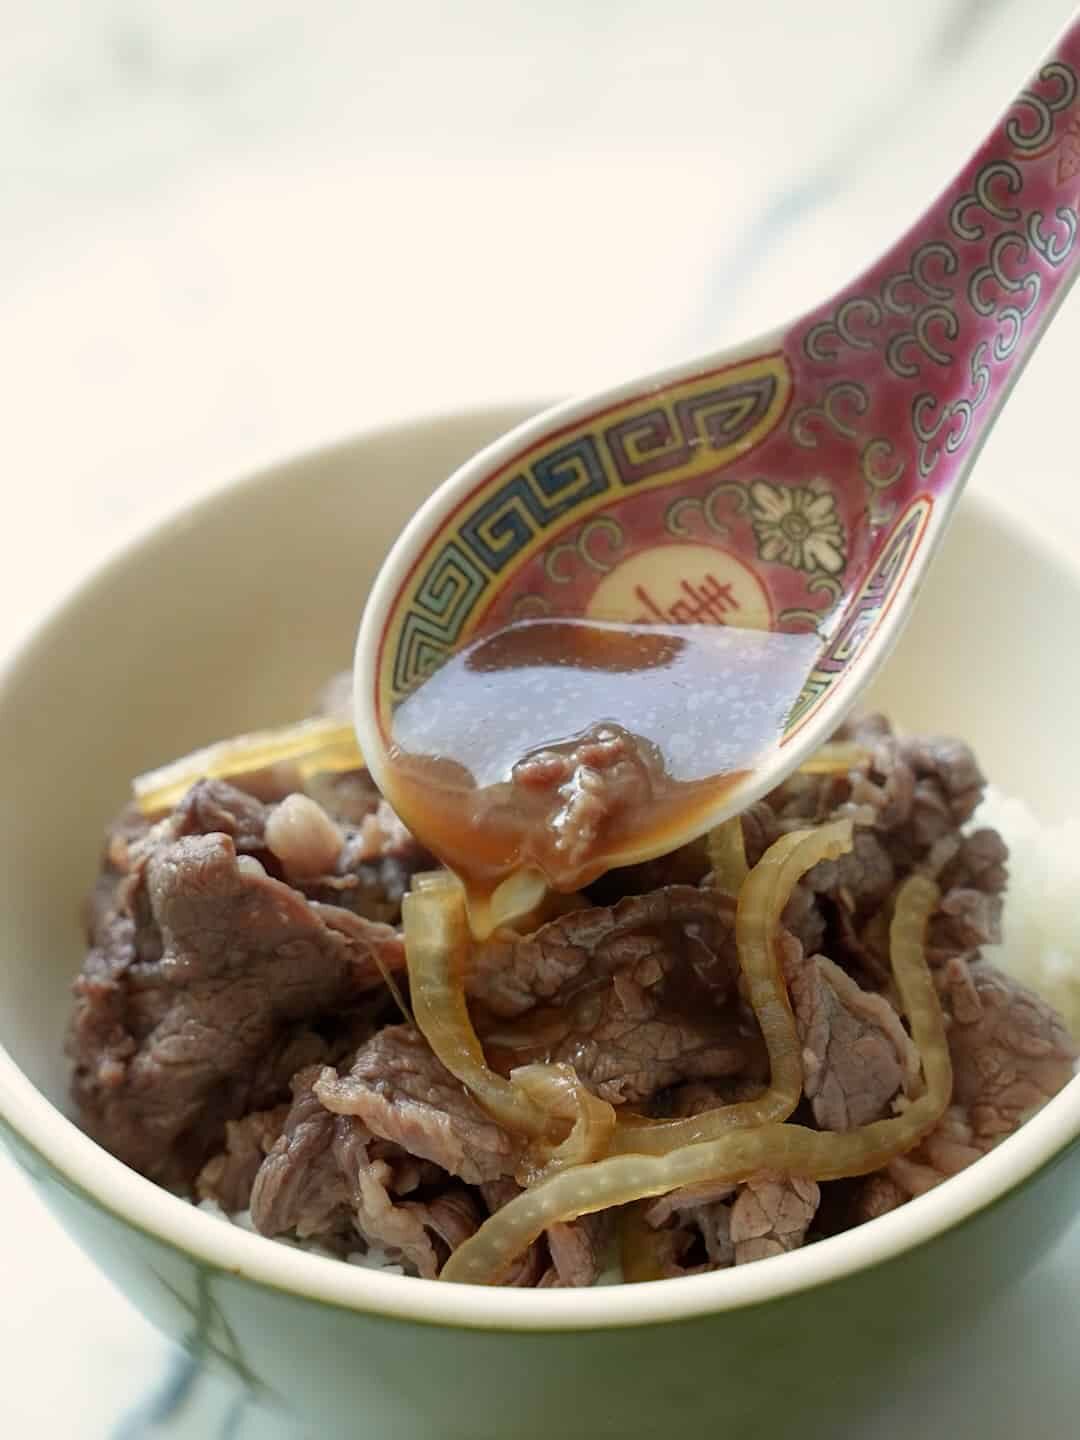 Beef gyudon sauce being topped over beef.